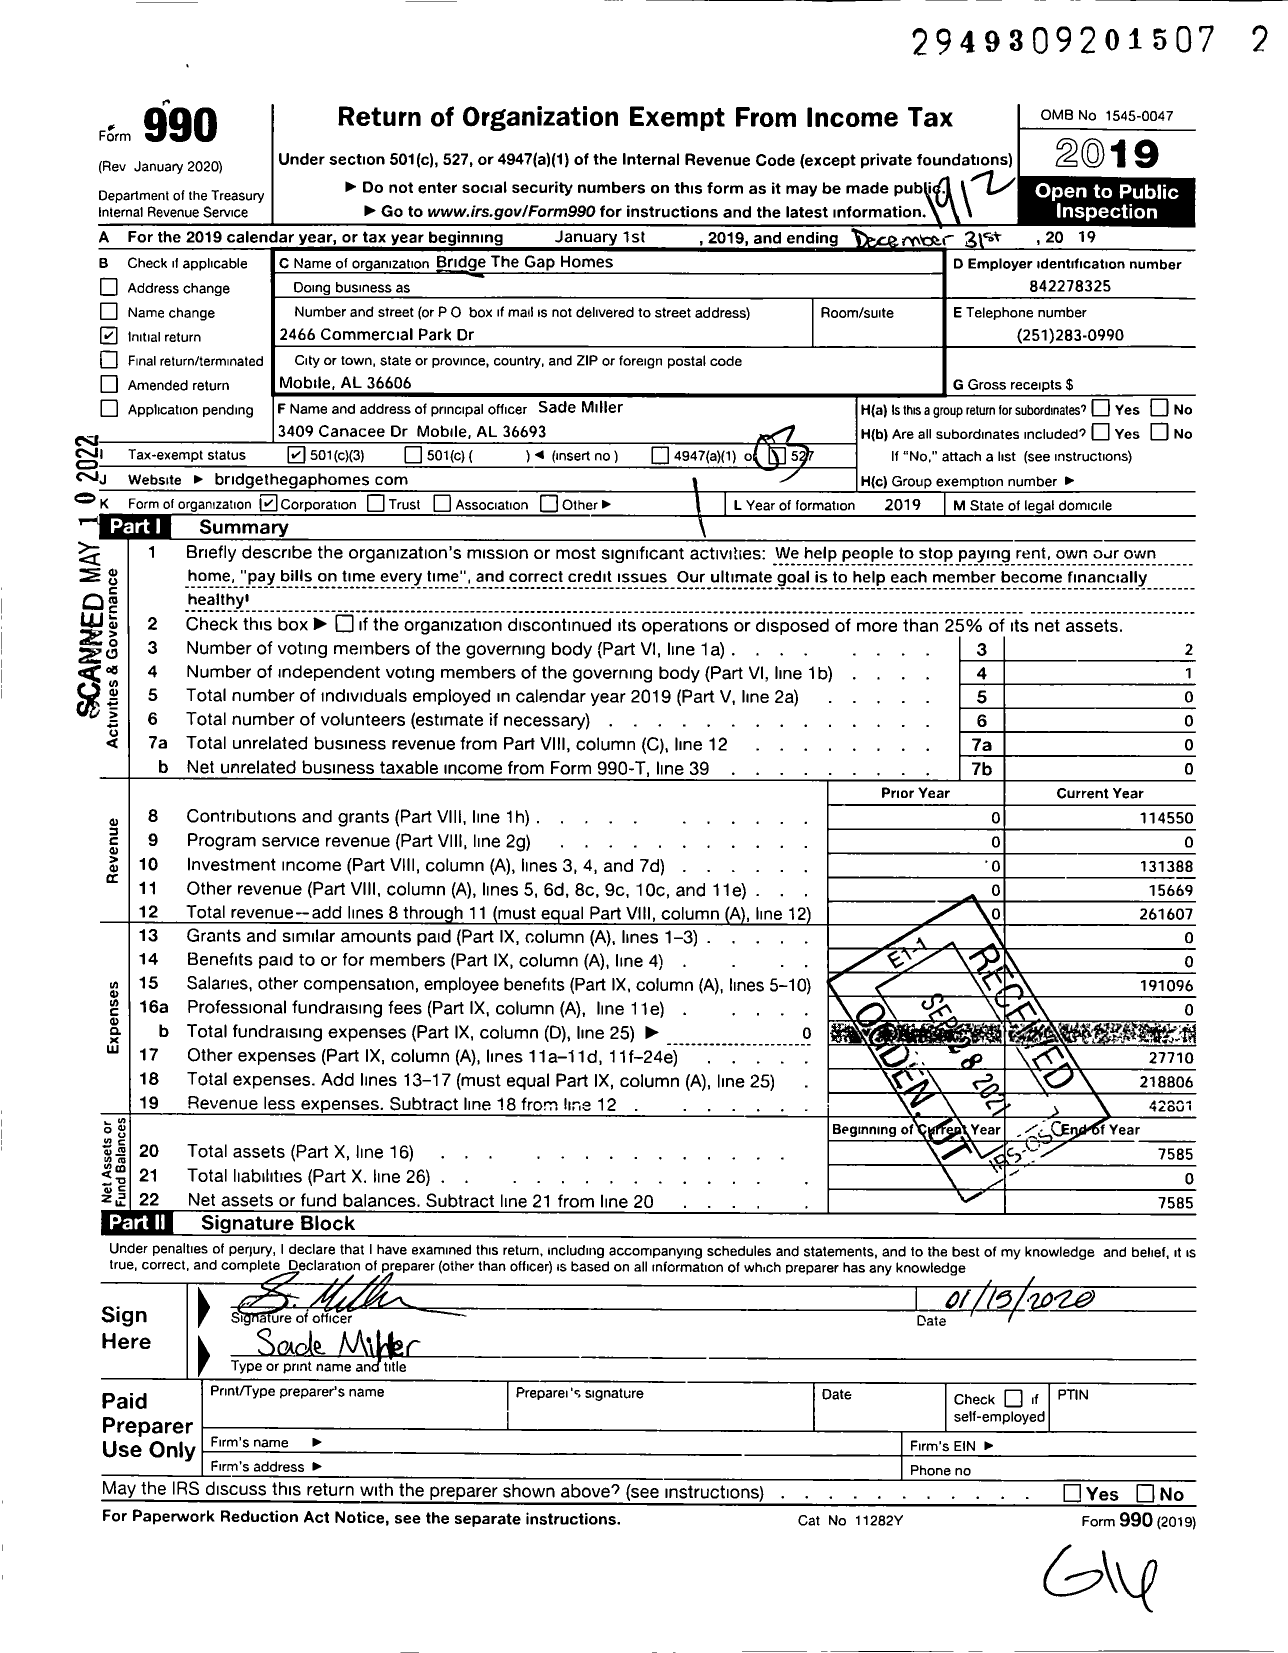 Image of first page of 2019 Form 990 for Bridge the Gap Homes